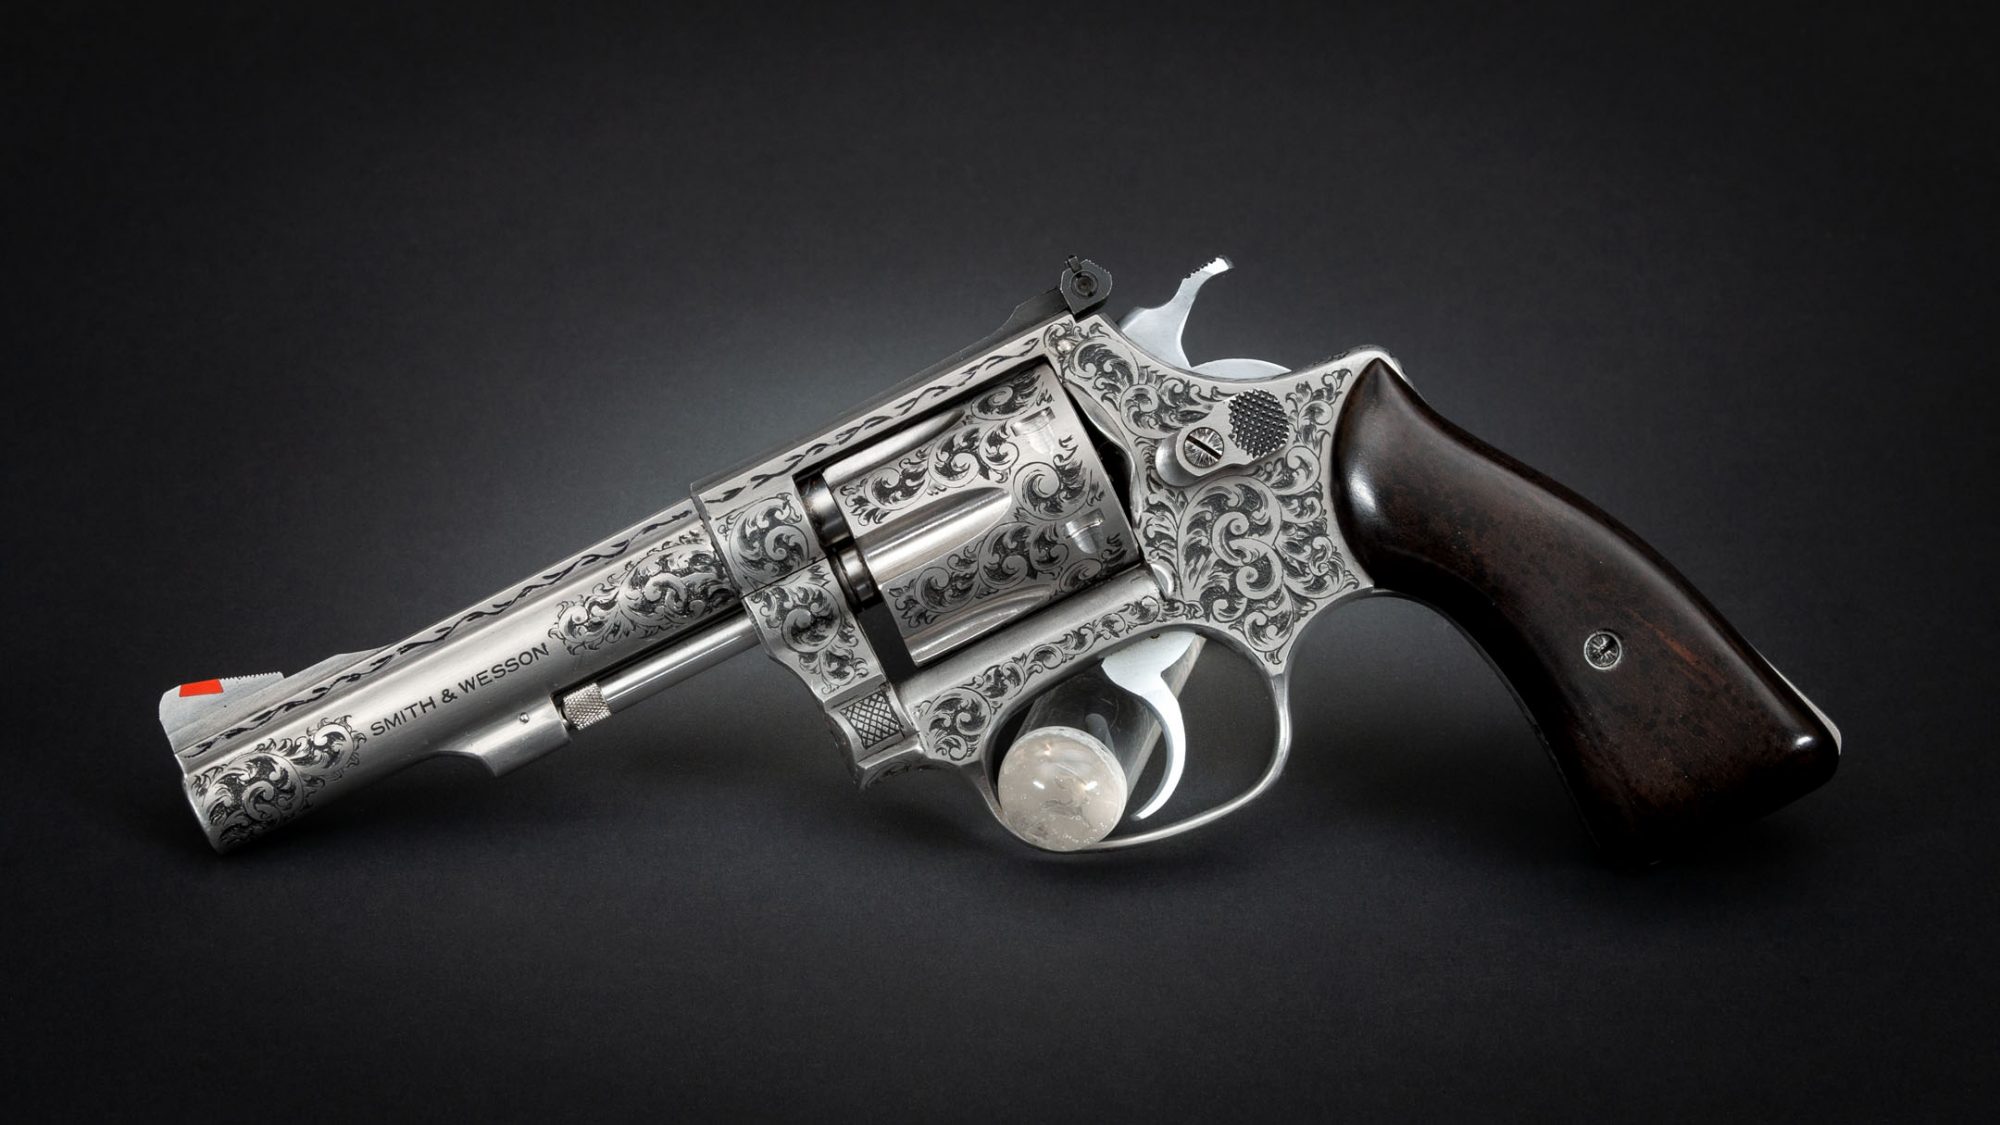 Photo of a Smith & Wesson Model 651 revolver engraved by Ralph W. Ingle, for sale by Turnbull Restoration of Bloomfield, NY